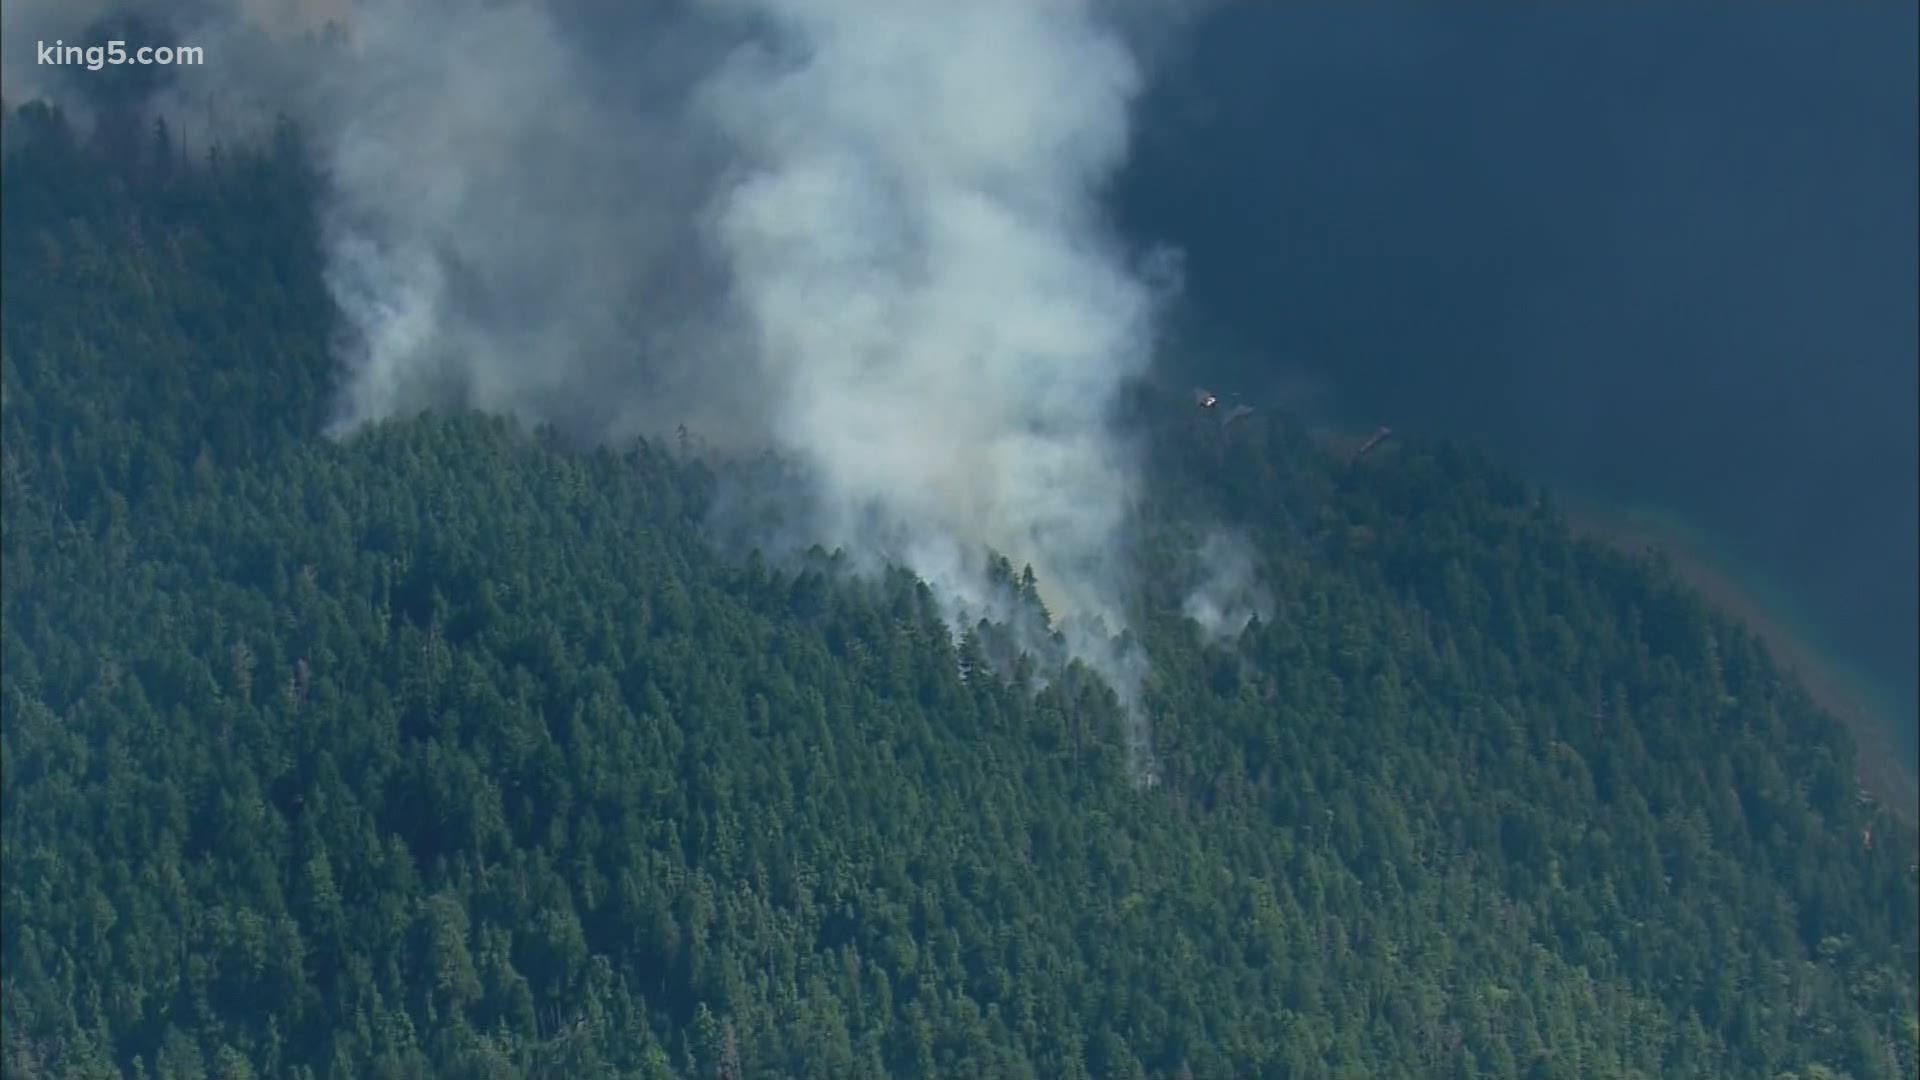 As crews battle a 200-acre fire in Douglas county another 65-acre fire rages on the west side of the Cascades near Lake Crescent on the Olympic Peninsula.